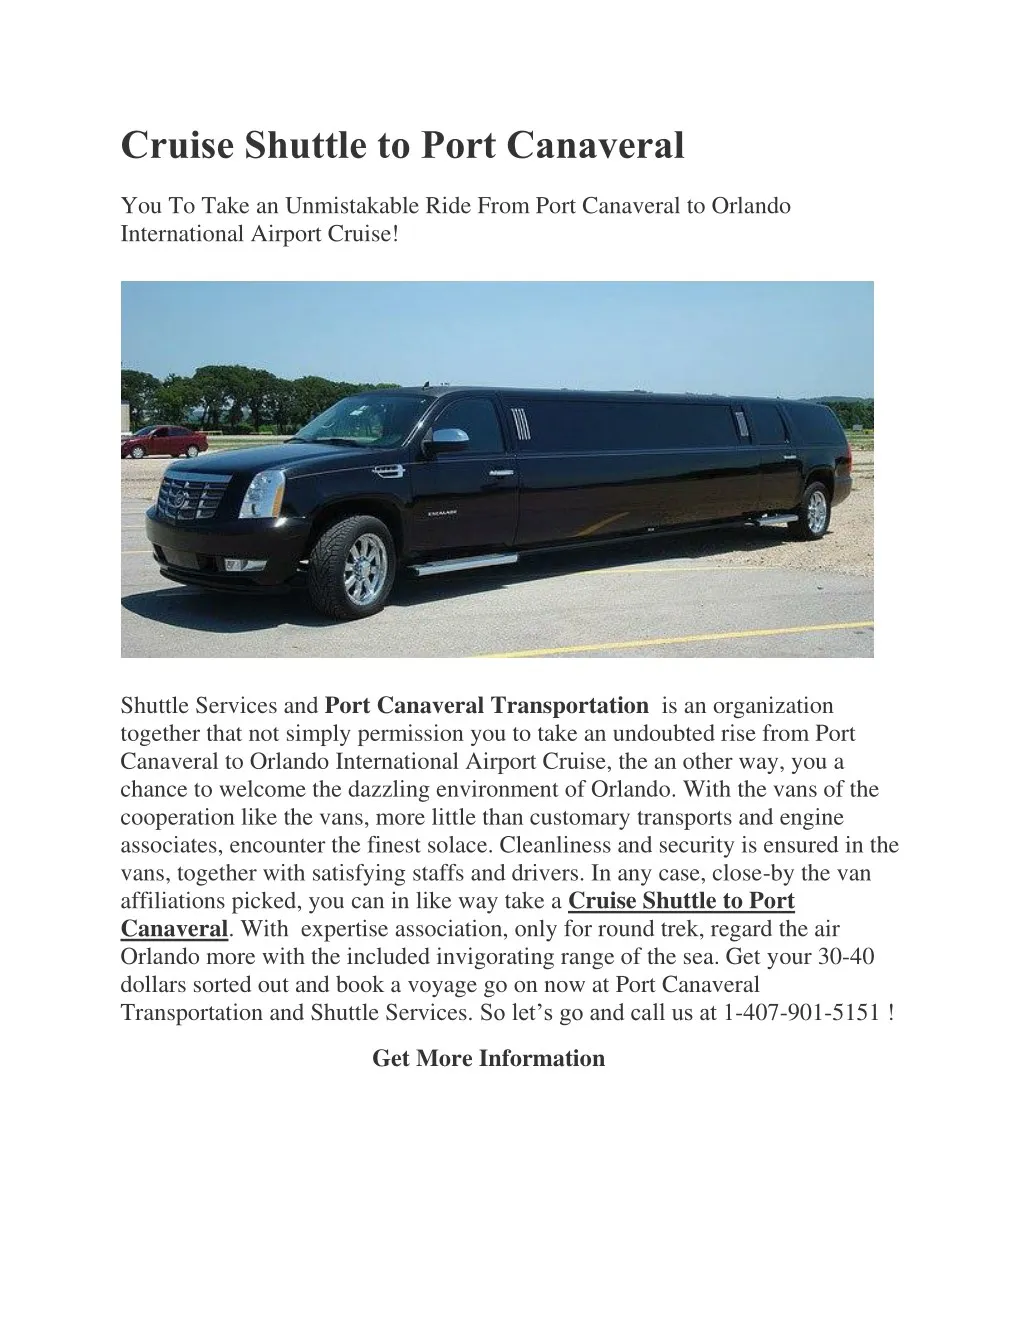 cruise shuttle to port canaveral